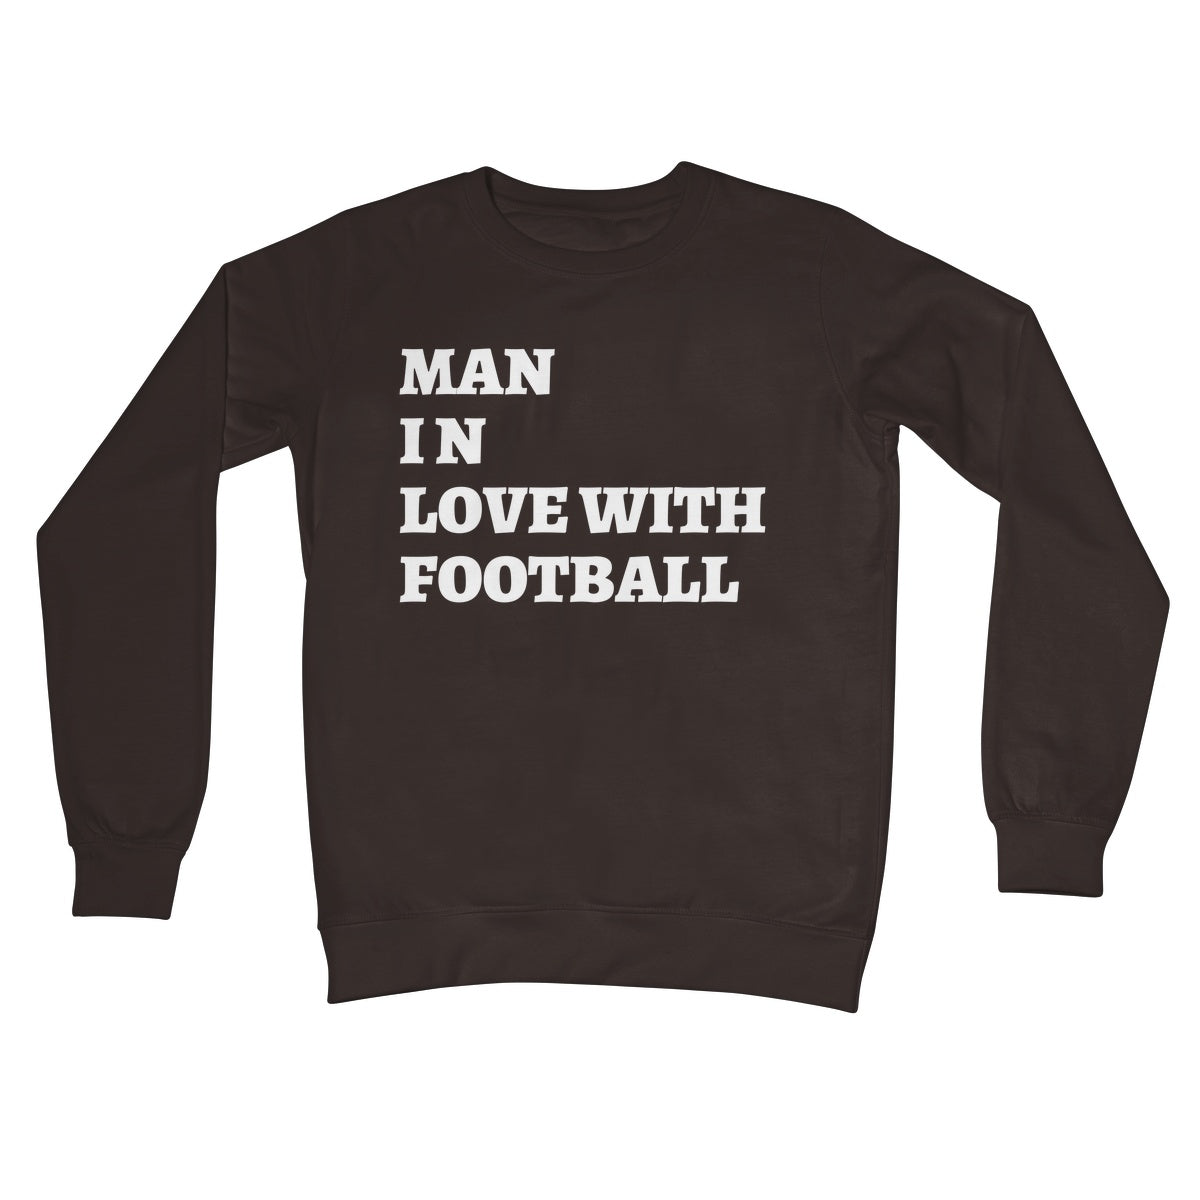 man in love with football jumper brown